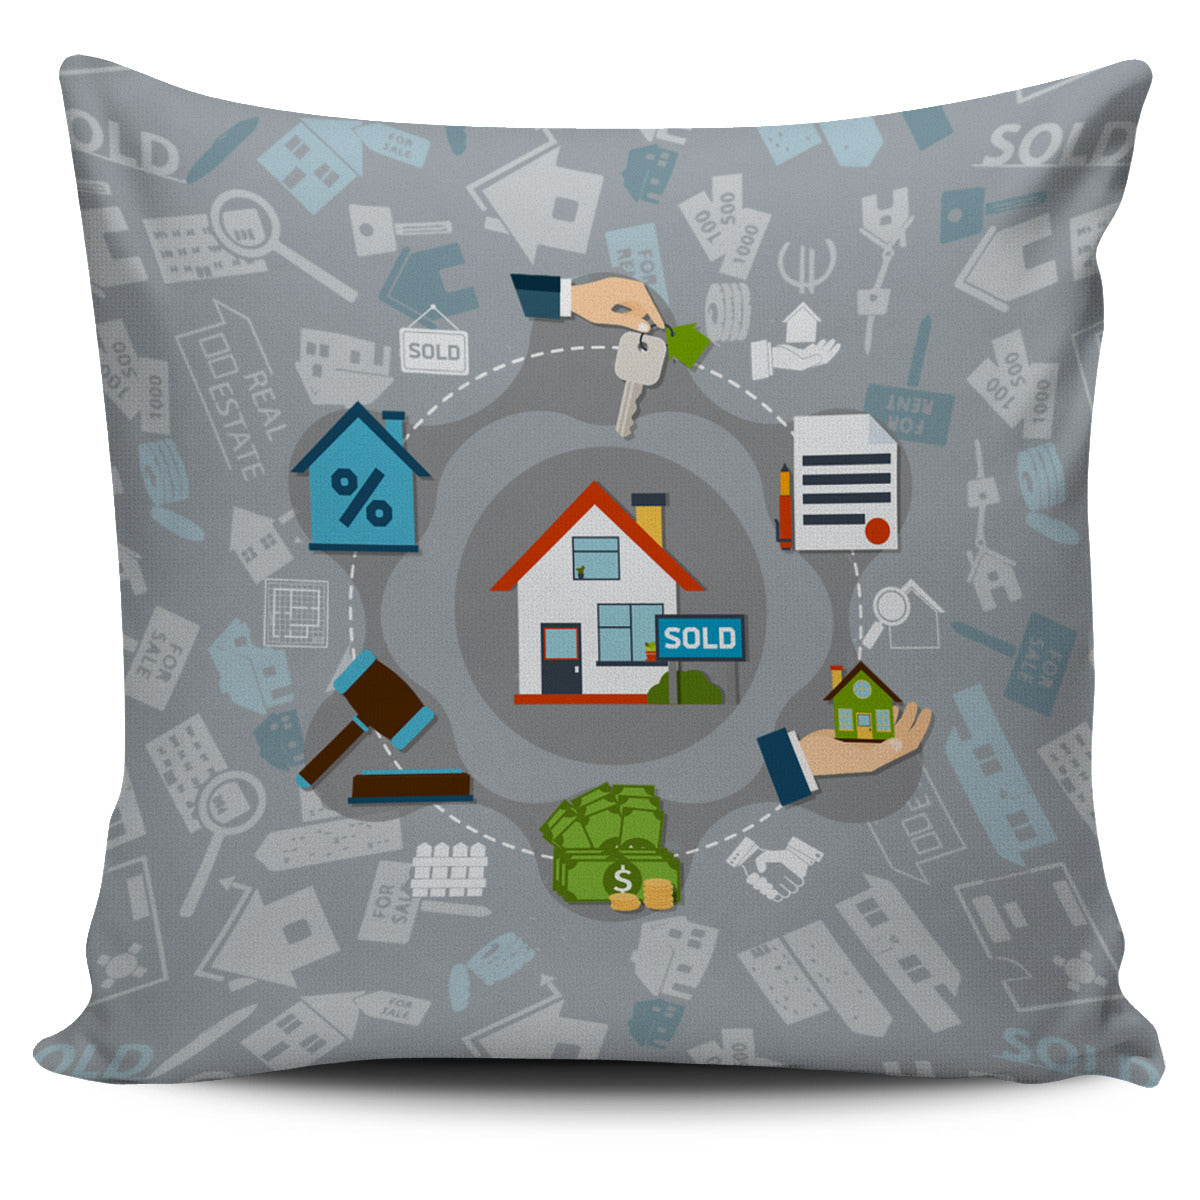 Real Estate Sold Pillow Cover